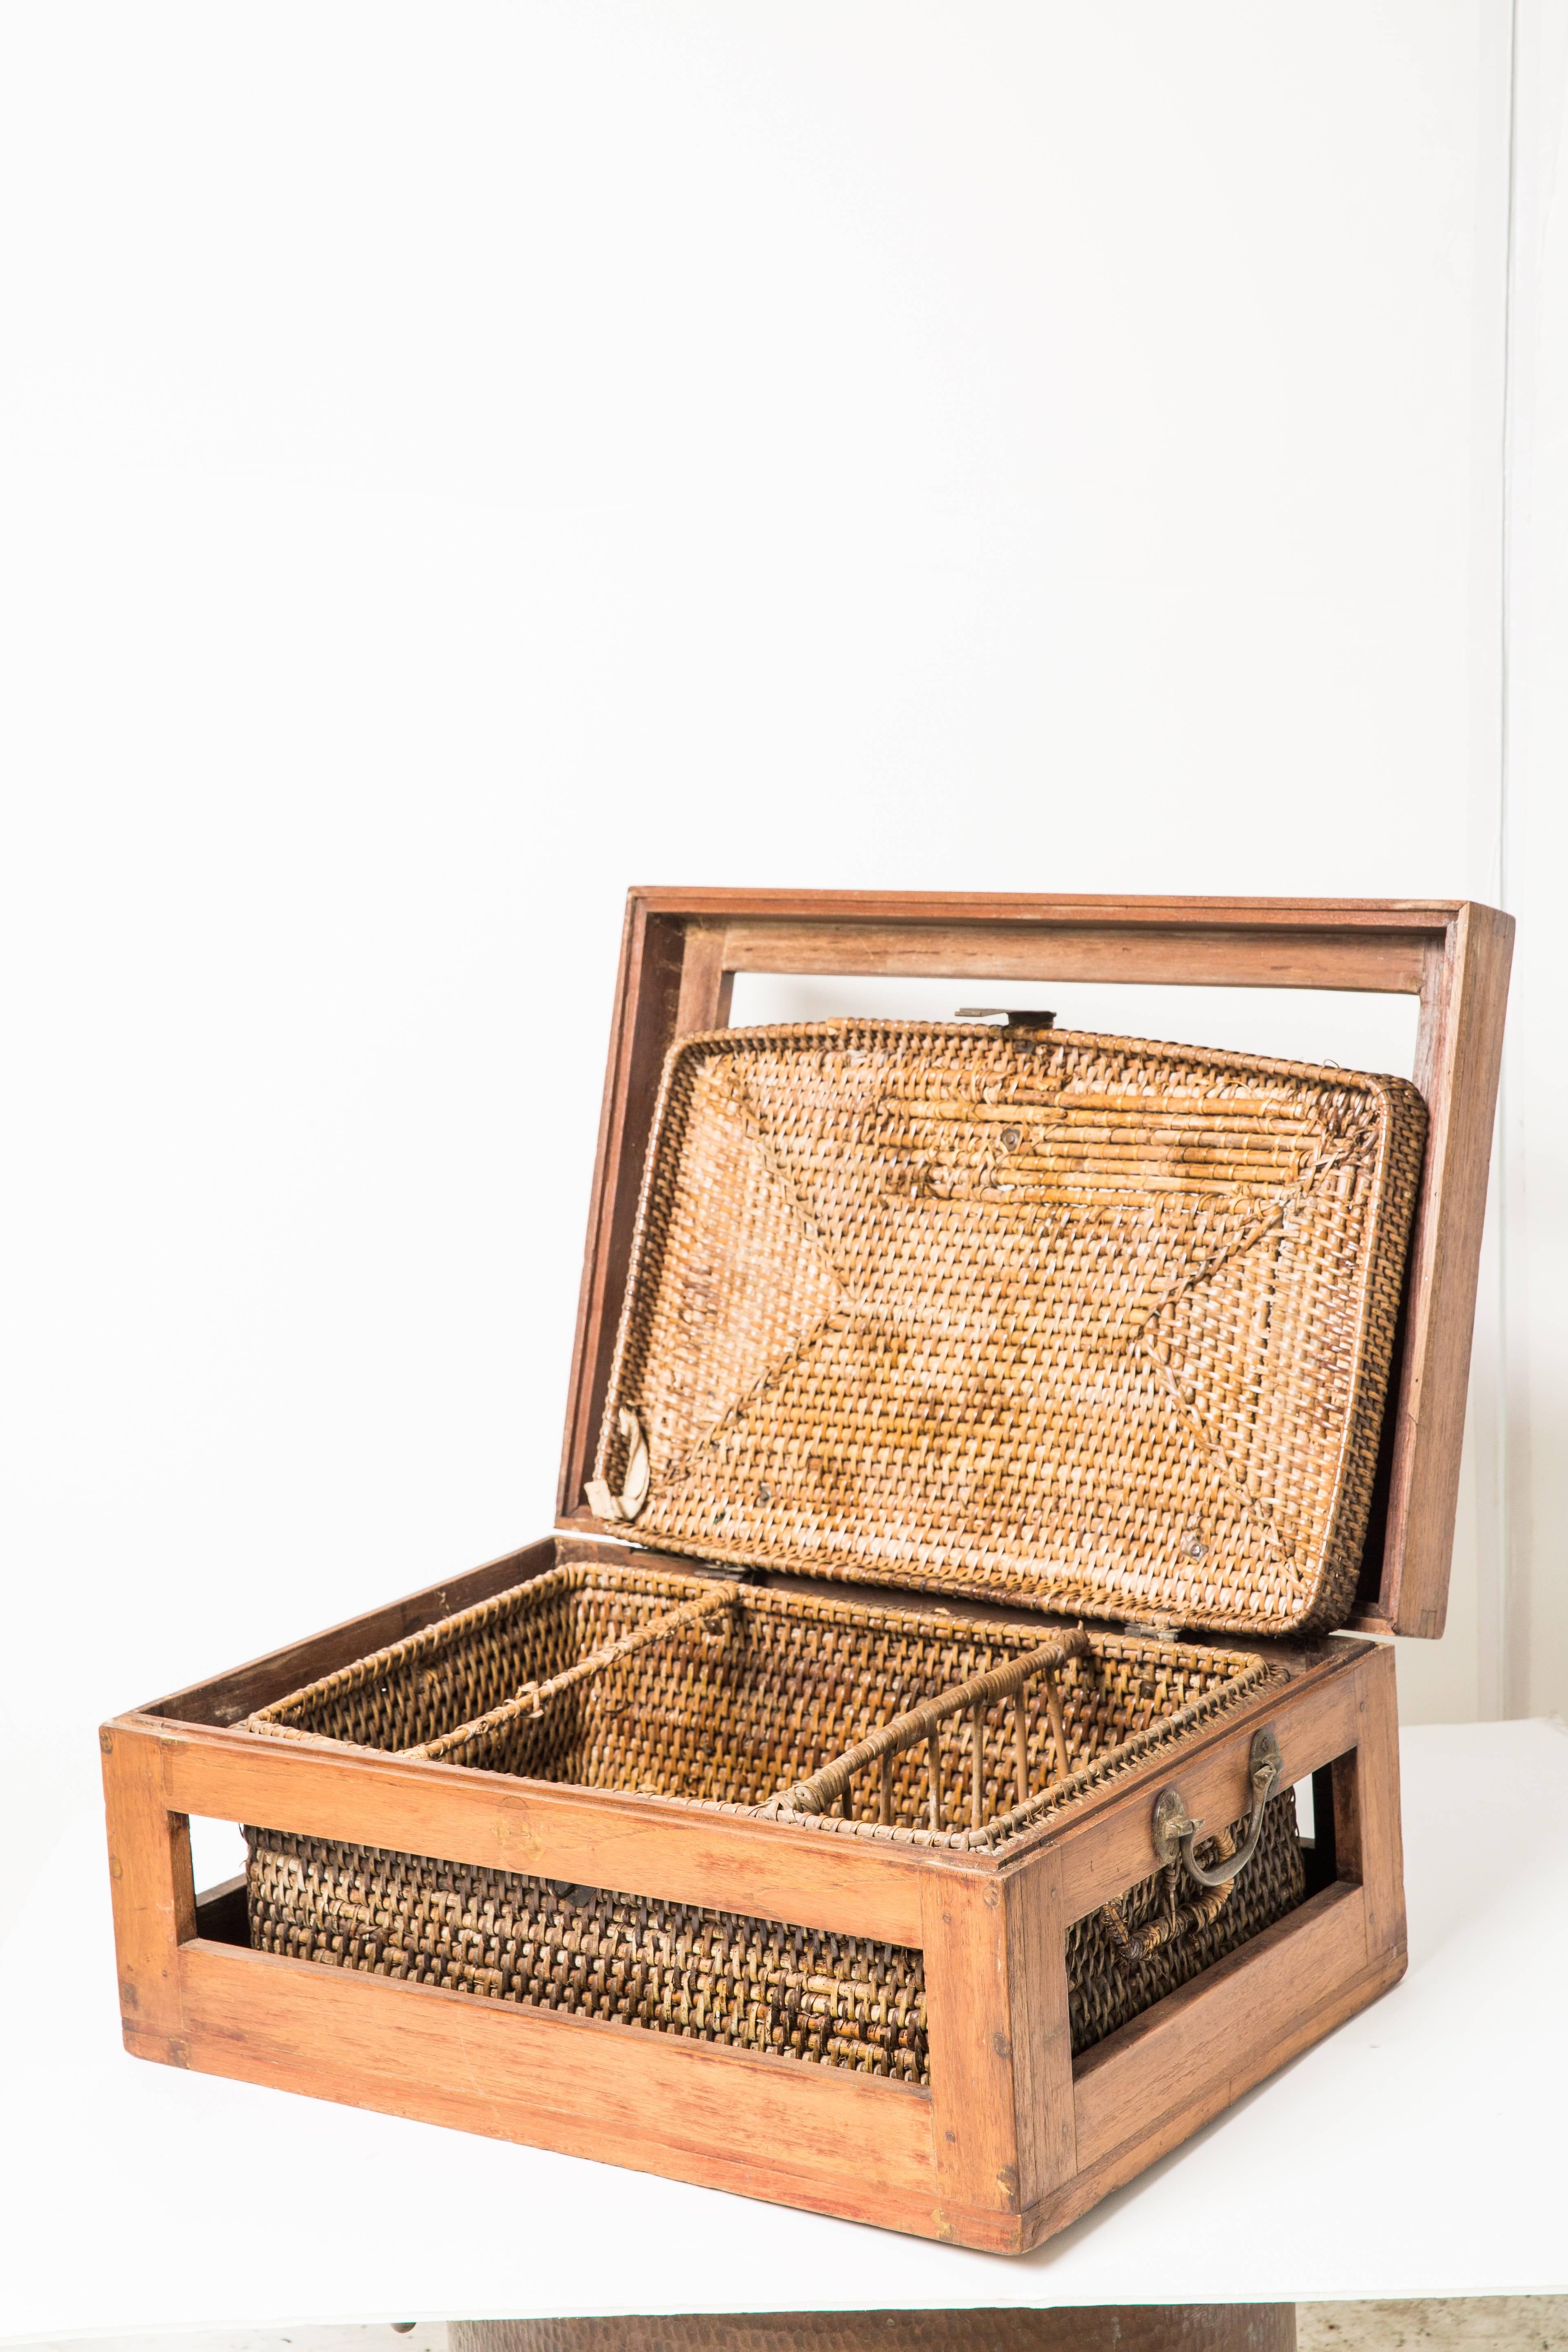 Early 20th Century Rattan Picnic Basket with Teak Frame For Sale 4